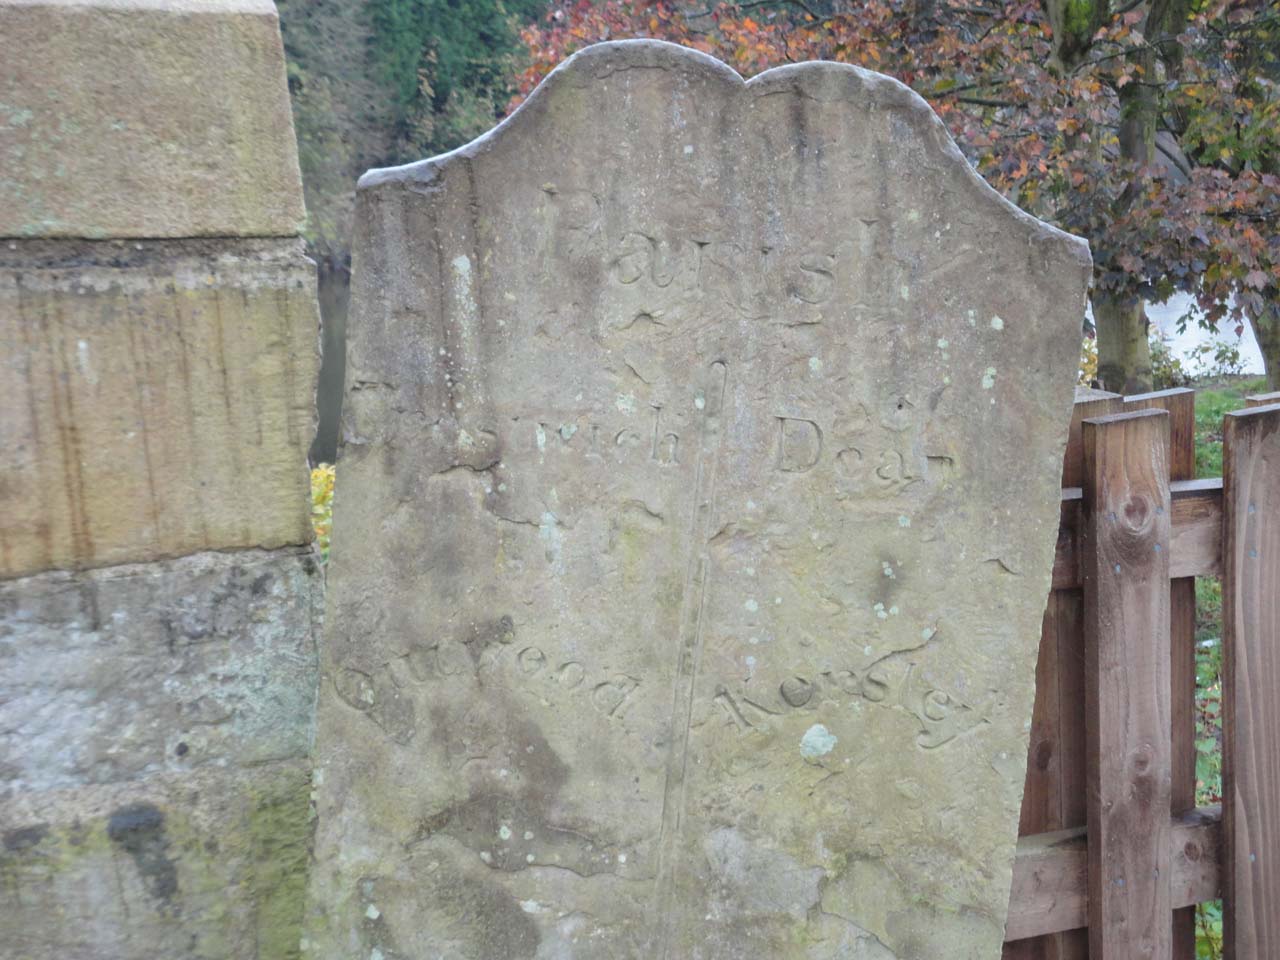 A boundary stone between the Parishes of Prestwich and Dean; stands by Ringley Old Bridge on the opposite bank of the river Irwell from the church of St Saviour